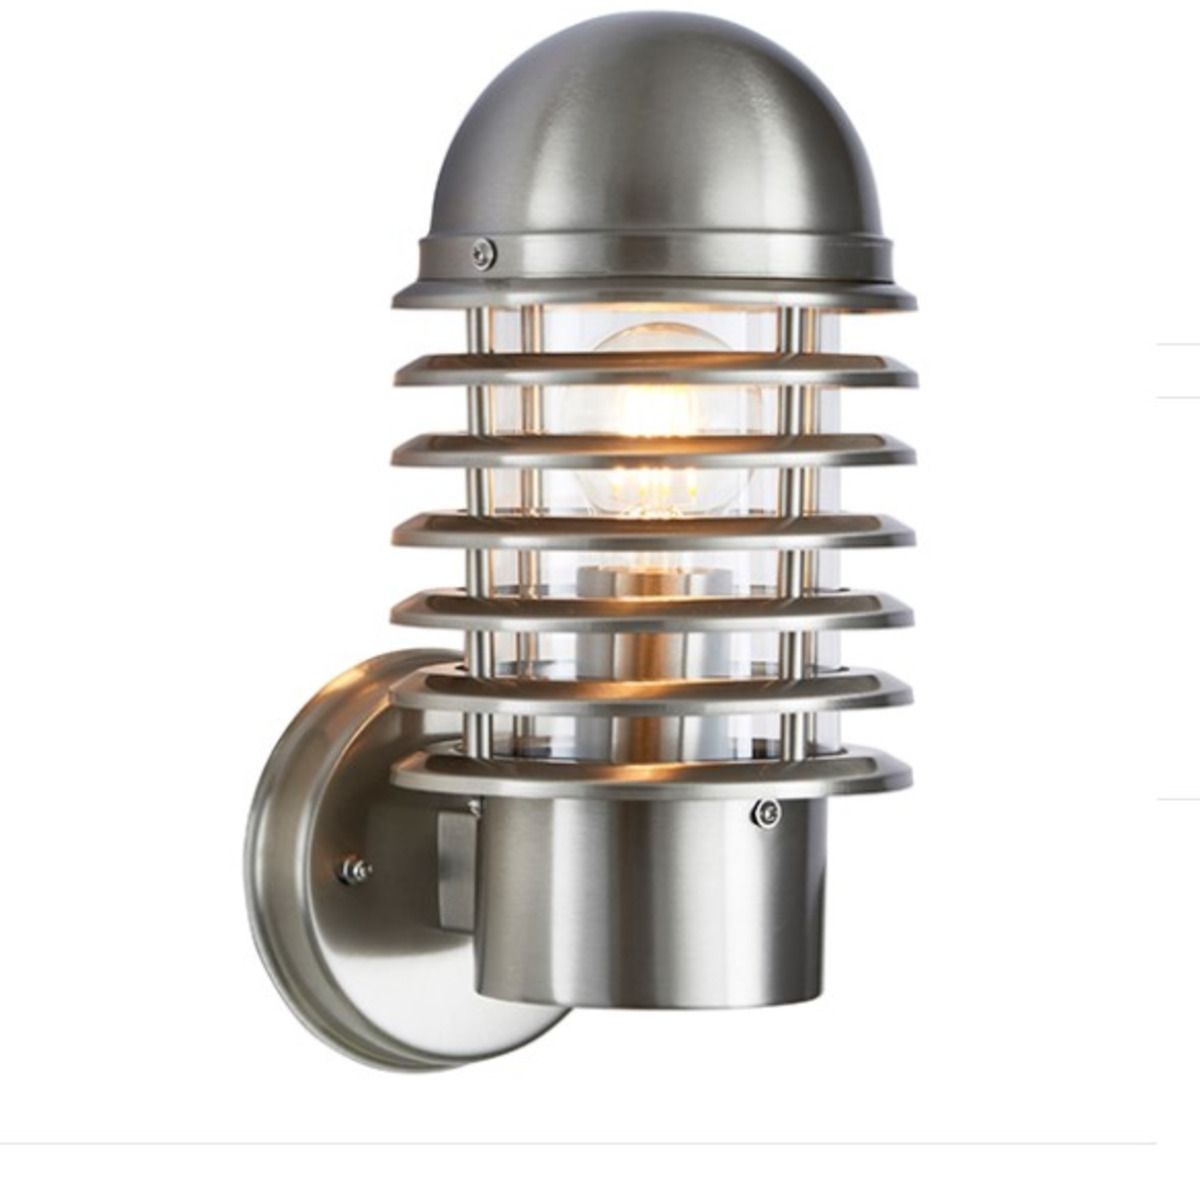 Lourve Stainless Steel Outdoor IP44 Wall Light